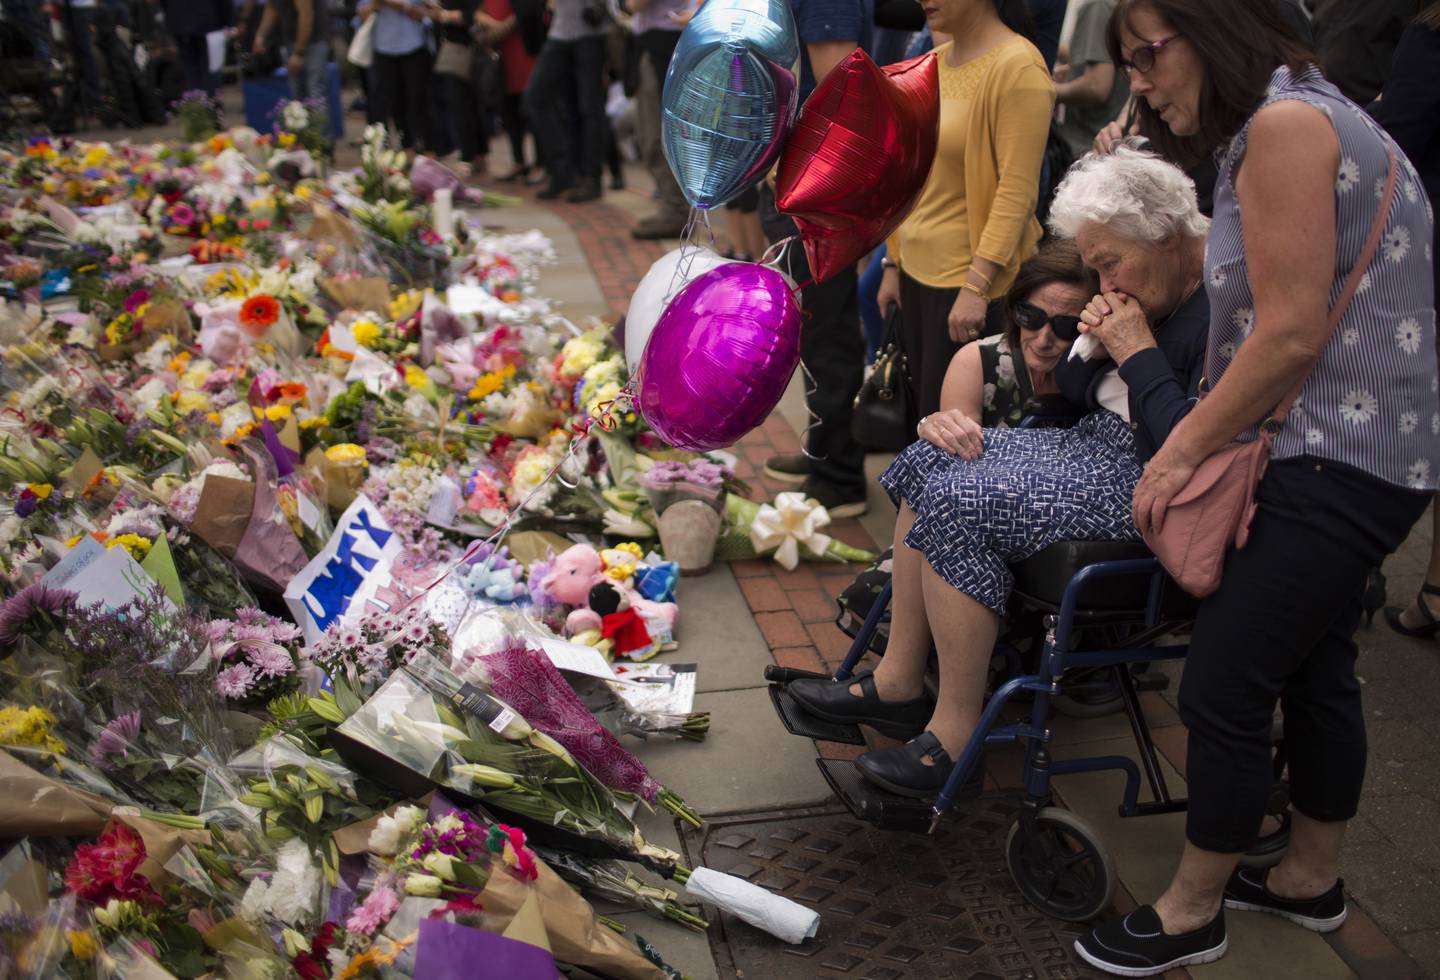 Sympathisers after placing flowers in a square in central Manchester, in May 2017. AP Photo